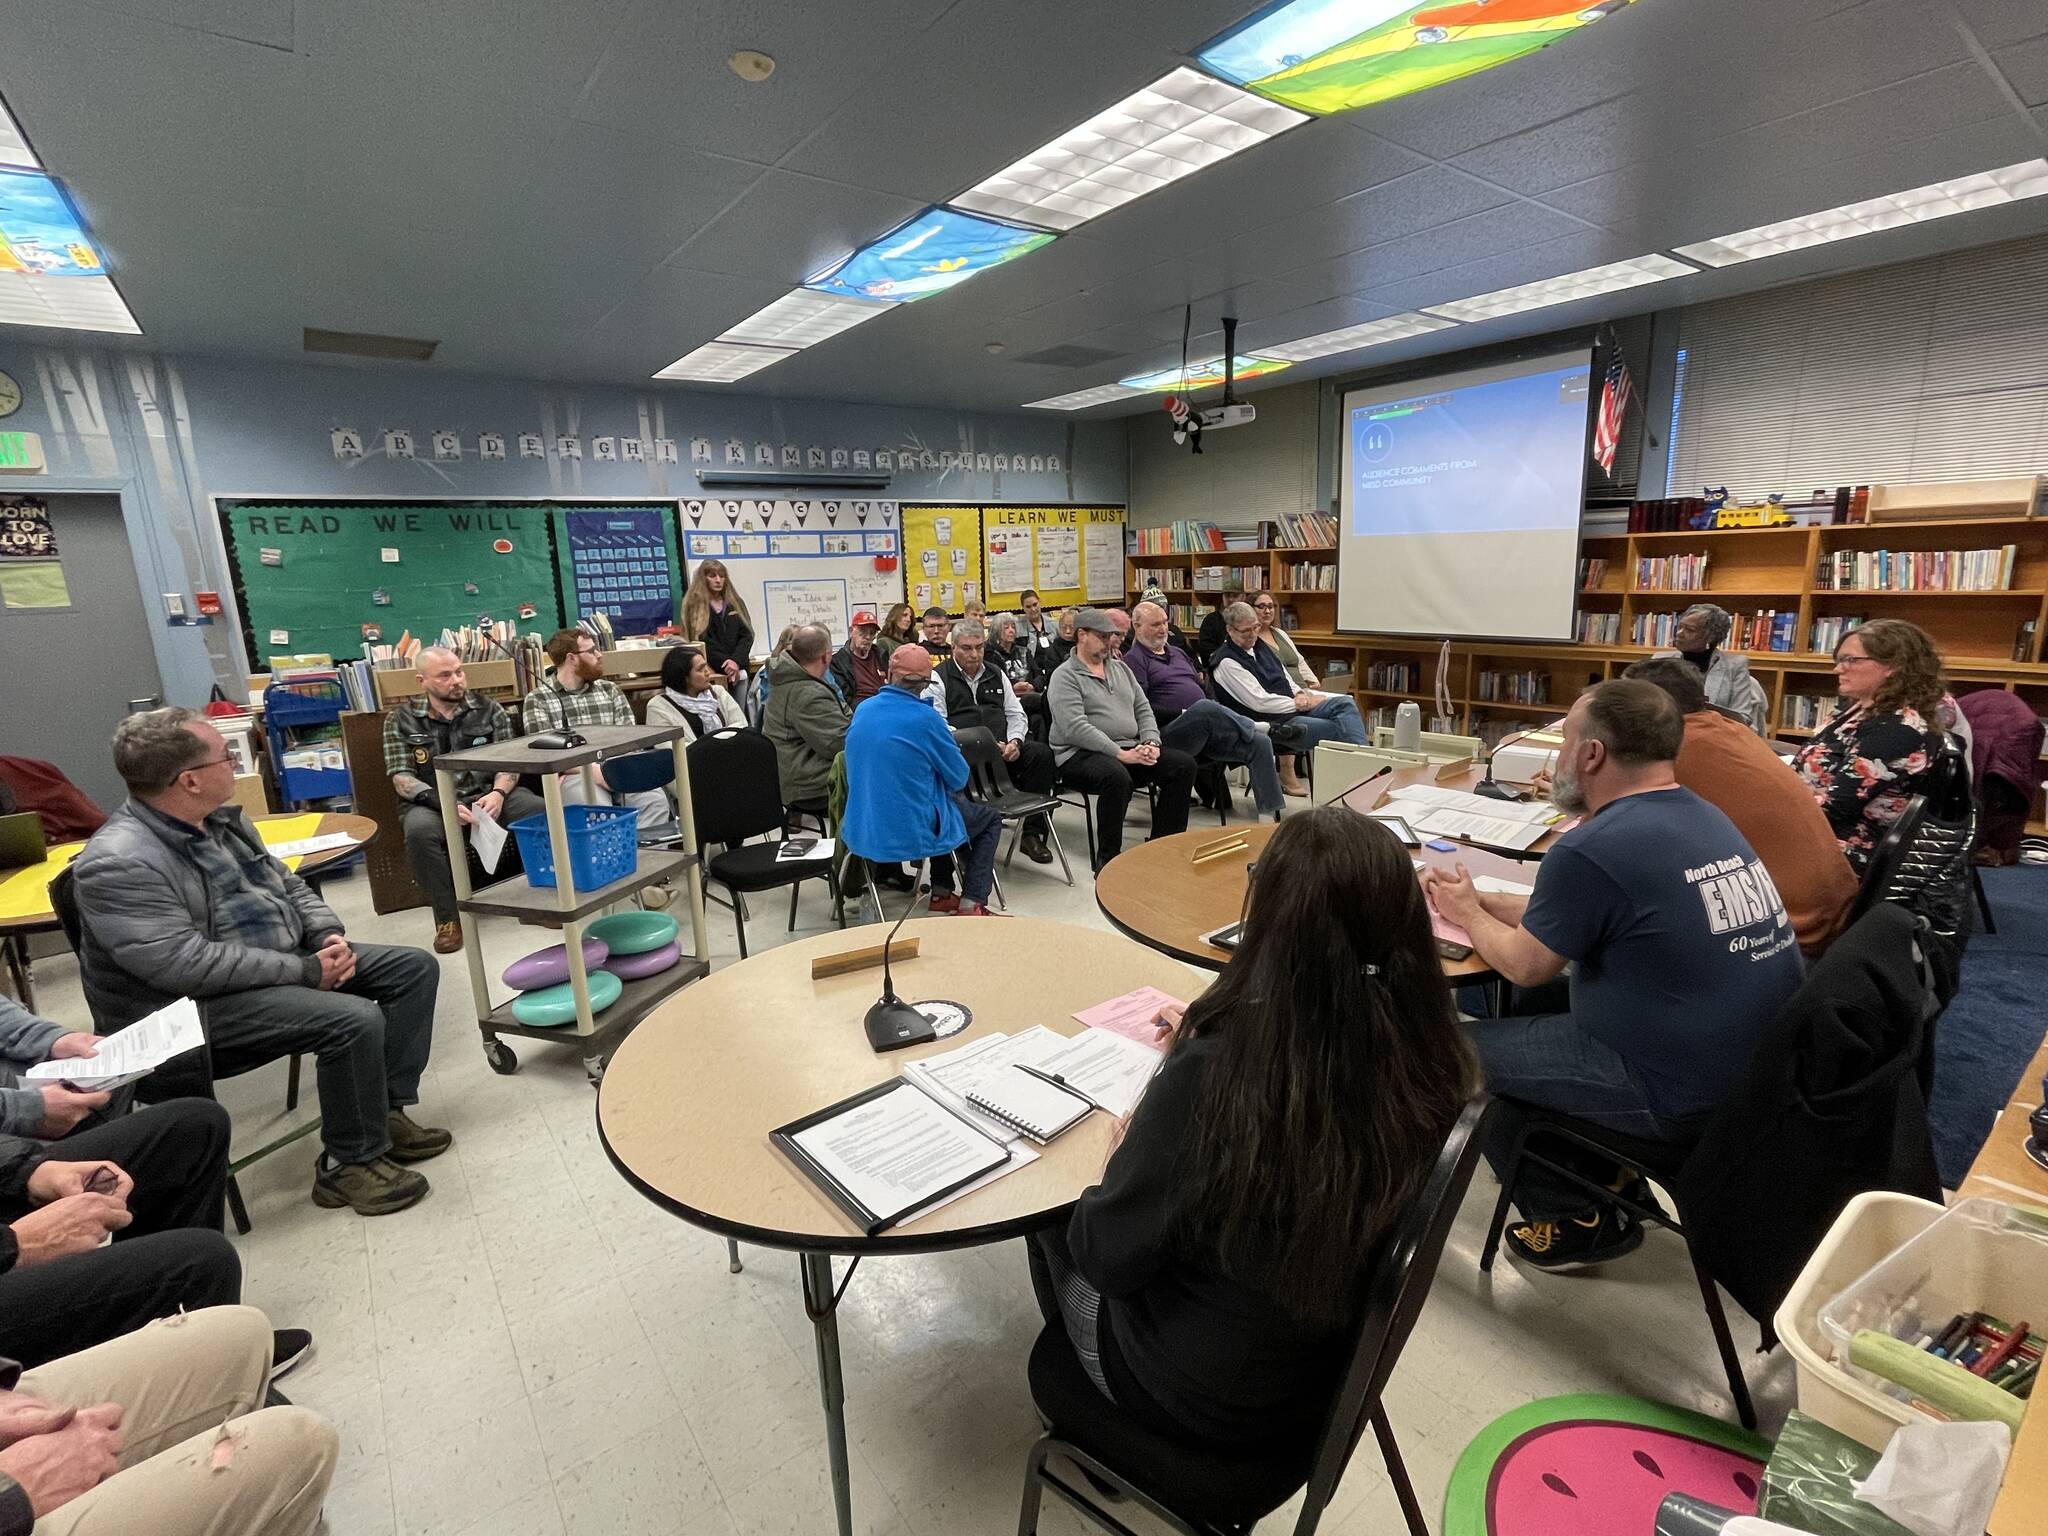 Michael S. Lockett / The Daily World 
The North Beach School Board met on Jan. 17 to discuss, among other issues, a project to build a tsunami tower near Ocean Shores Elementary School.